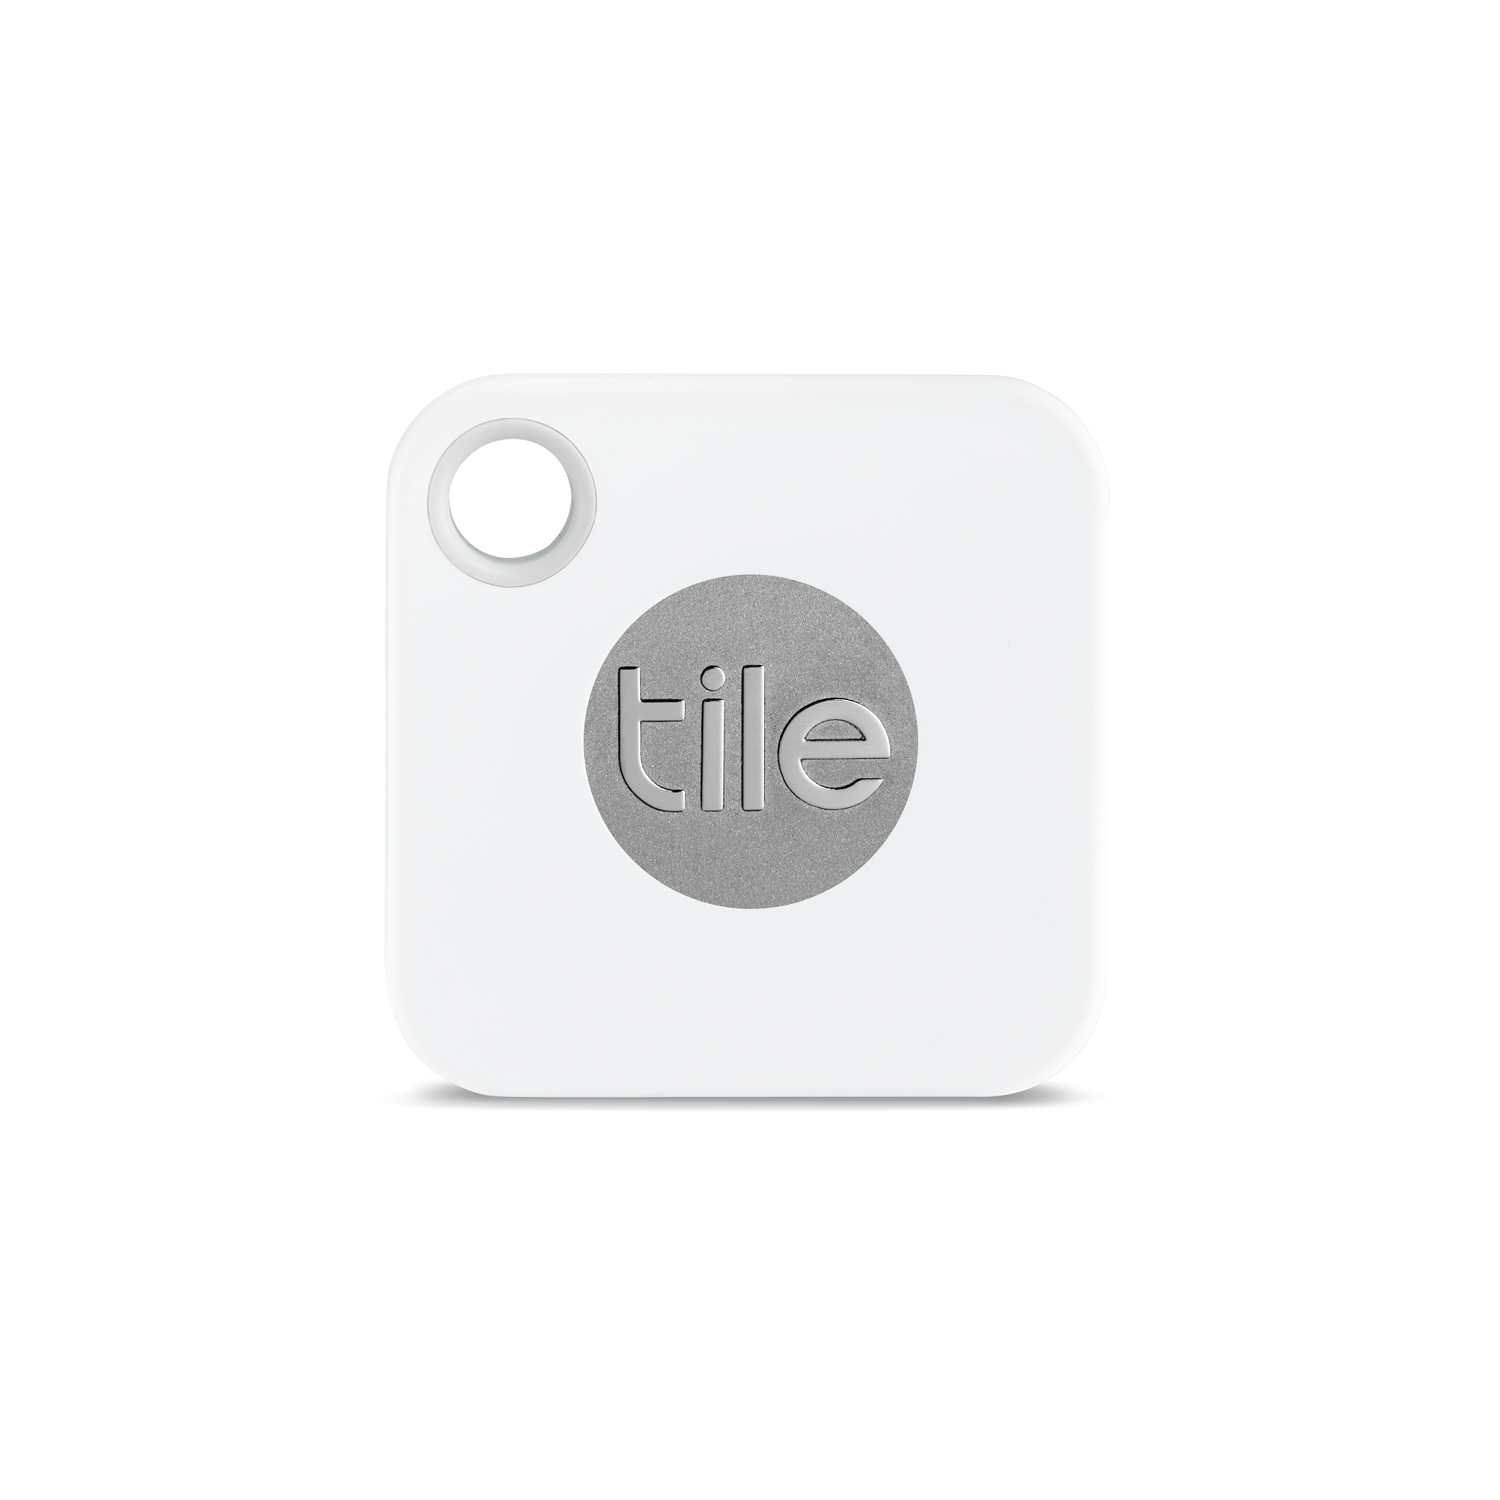 The Tile Mate should make losing your keys a thing of the past